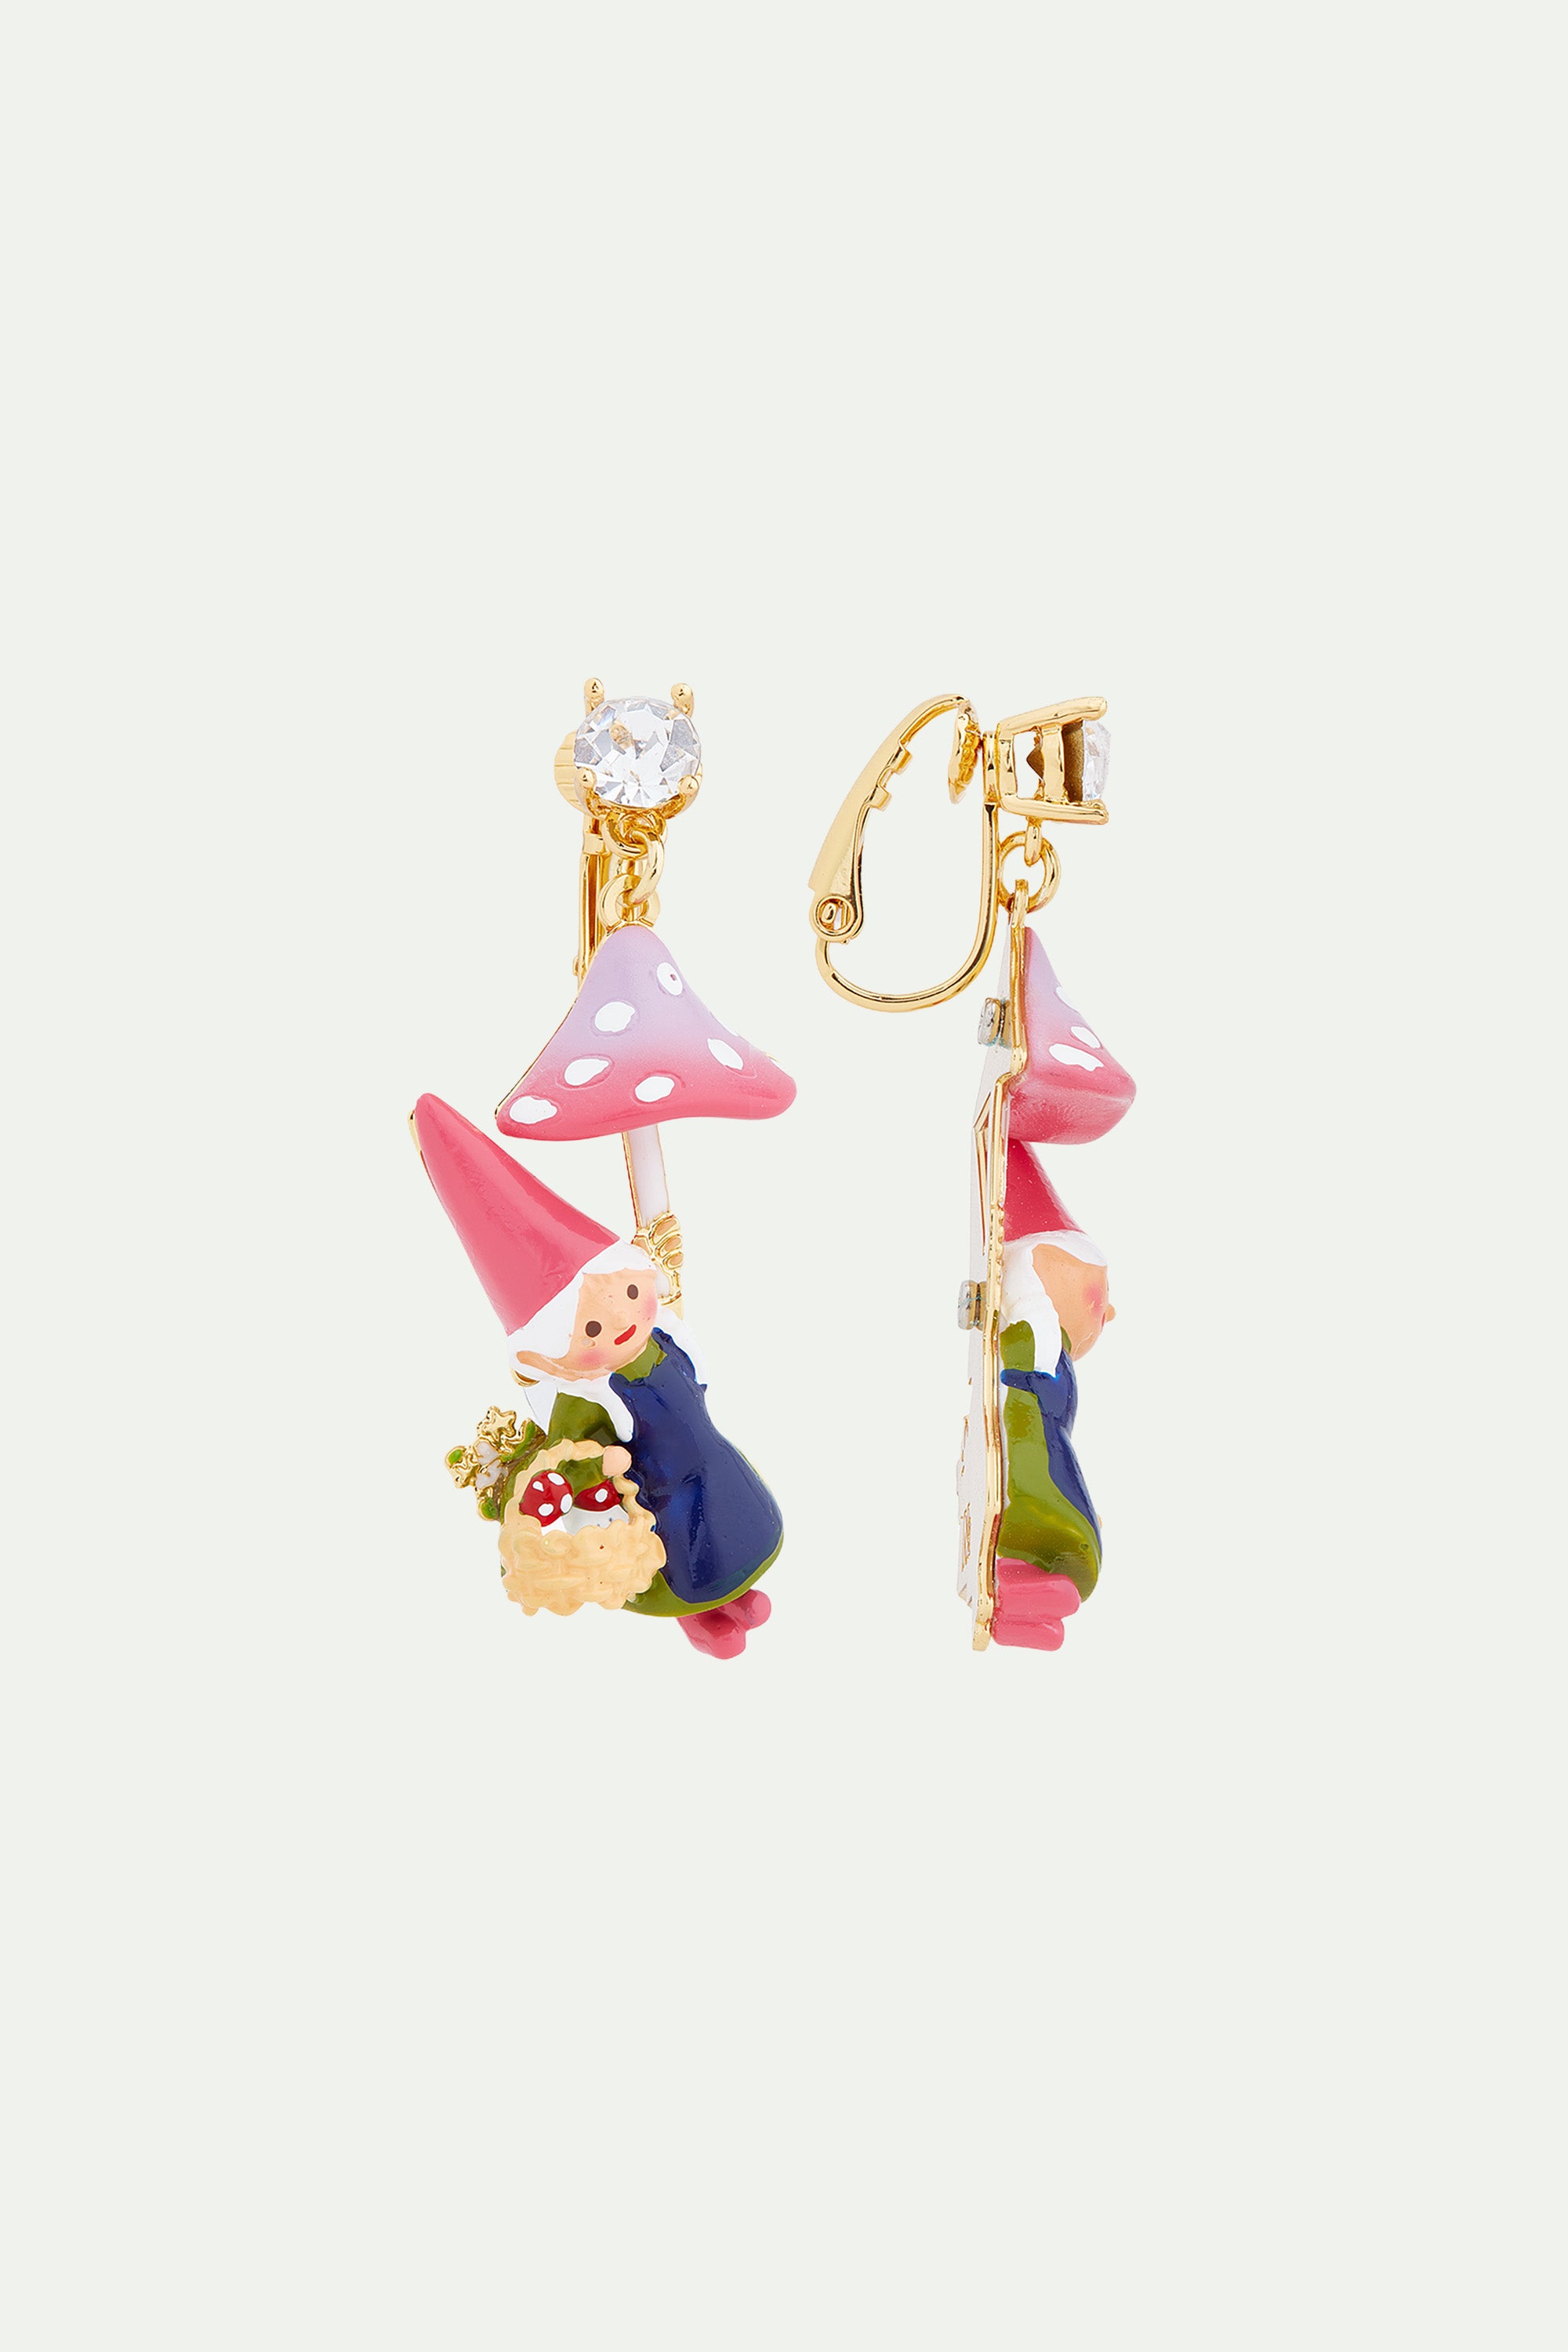 Garden gnome lady and mushroom picking post earrings